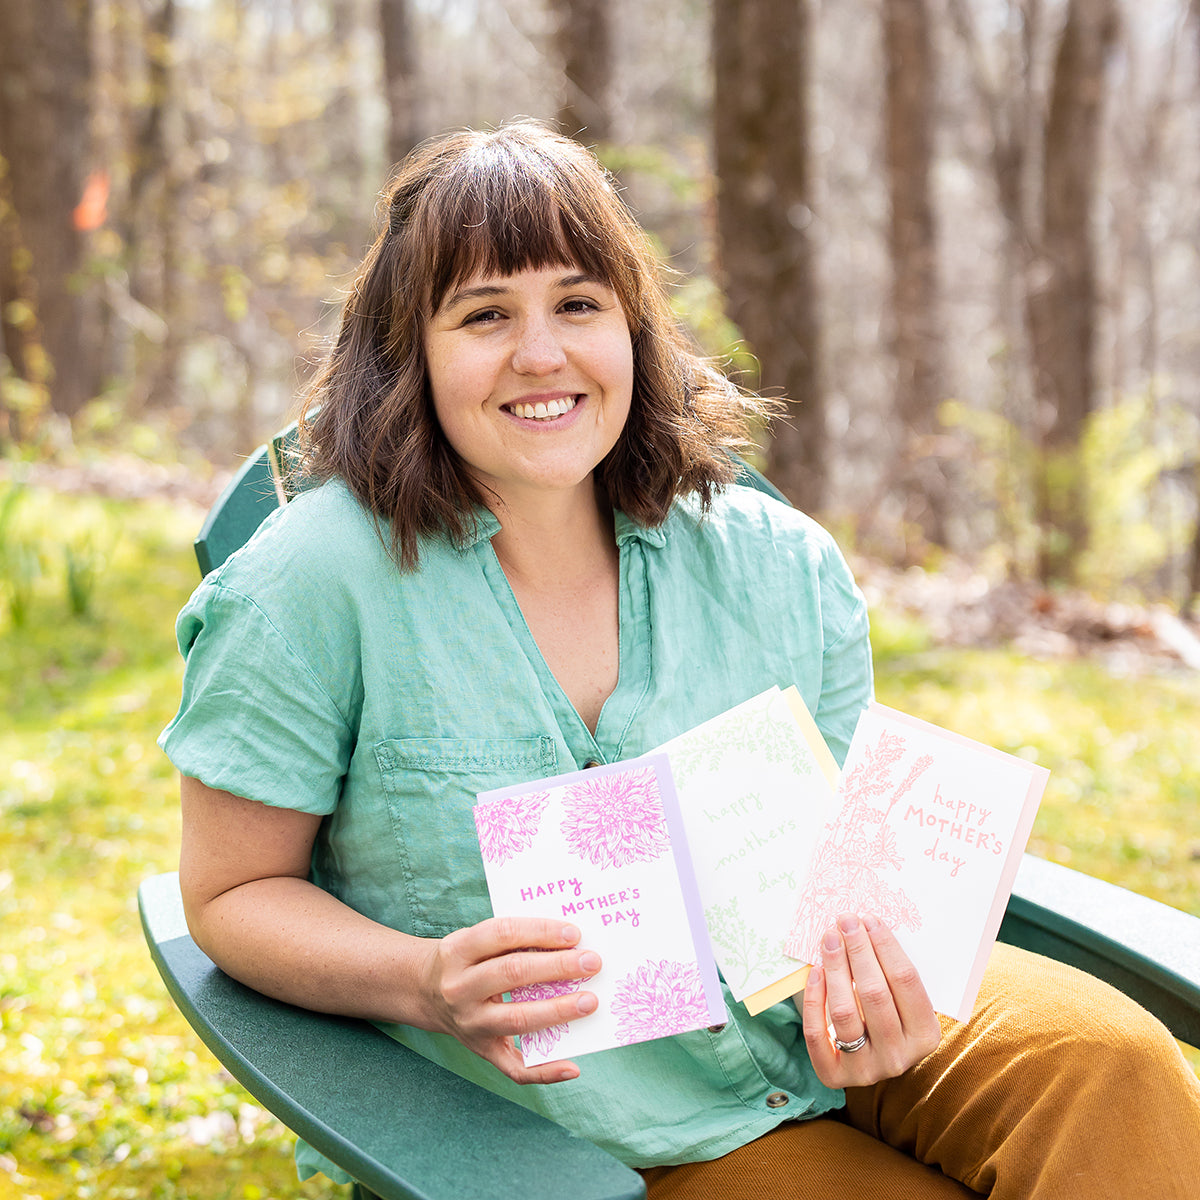 Macon York (adult female with short brown hair and bangs) sits outside in a green chair holding three Mother's Day Letterpress Greeting Cards: Dahlia, Brand, Wildflowers. She is smiling and looking directly at the camera. She is sitting in a grassy yard with deciduous trees behind her, in early Spring. 